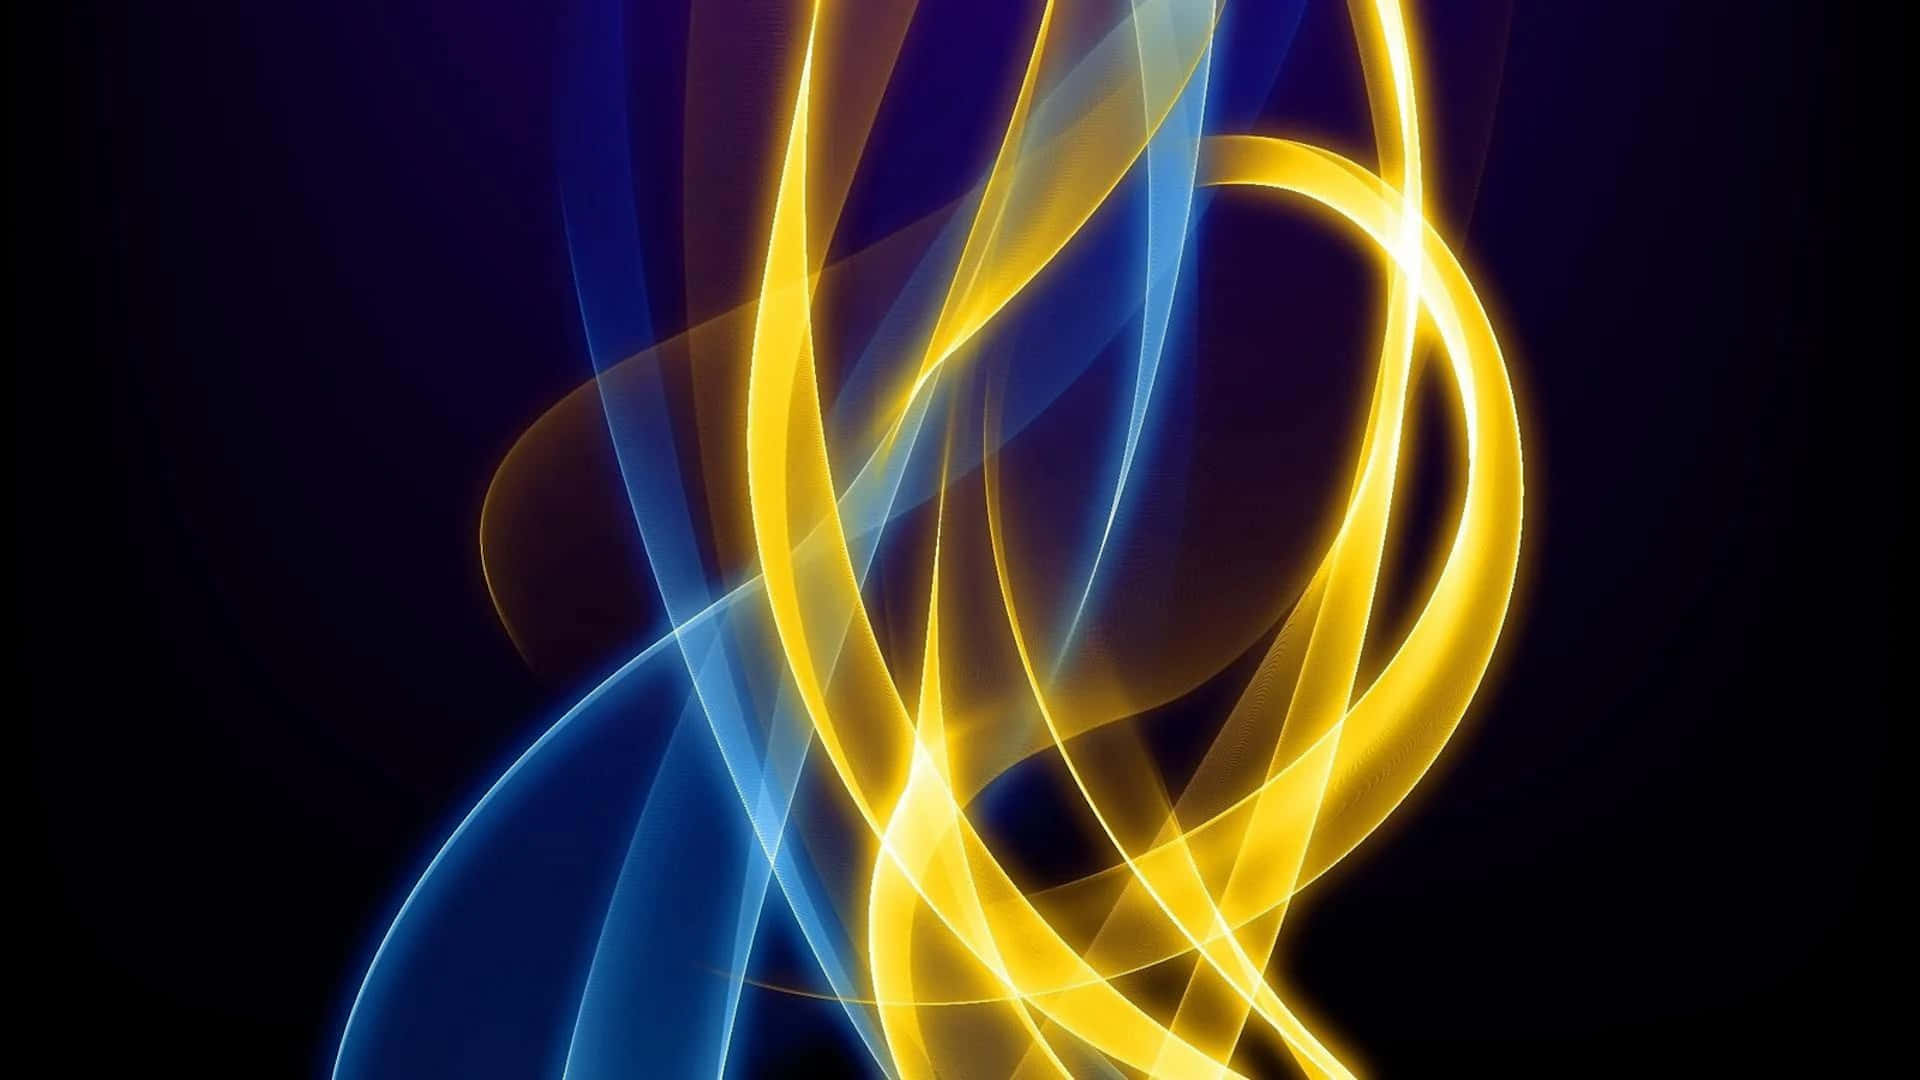 "Spectacular Blue And Gold Background"